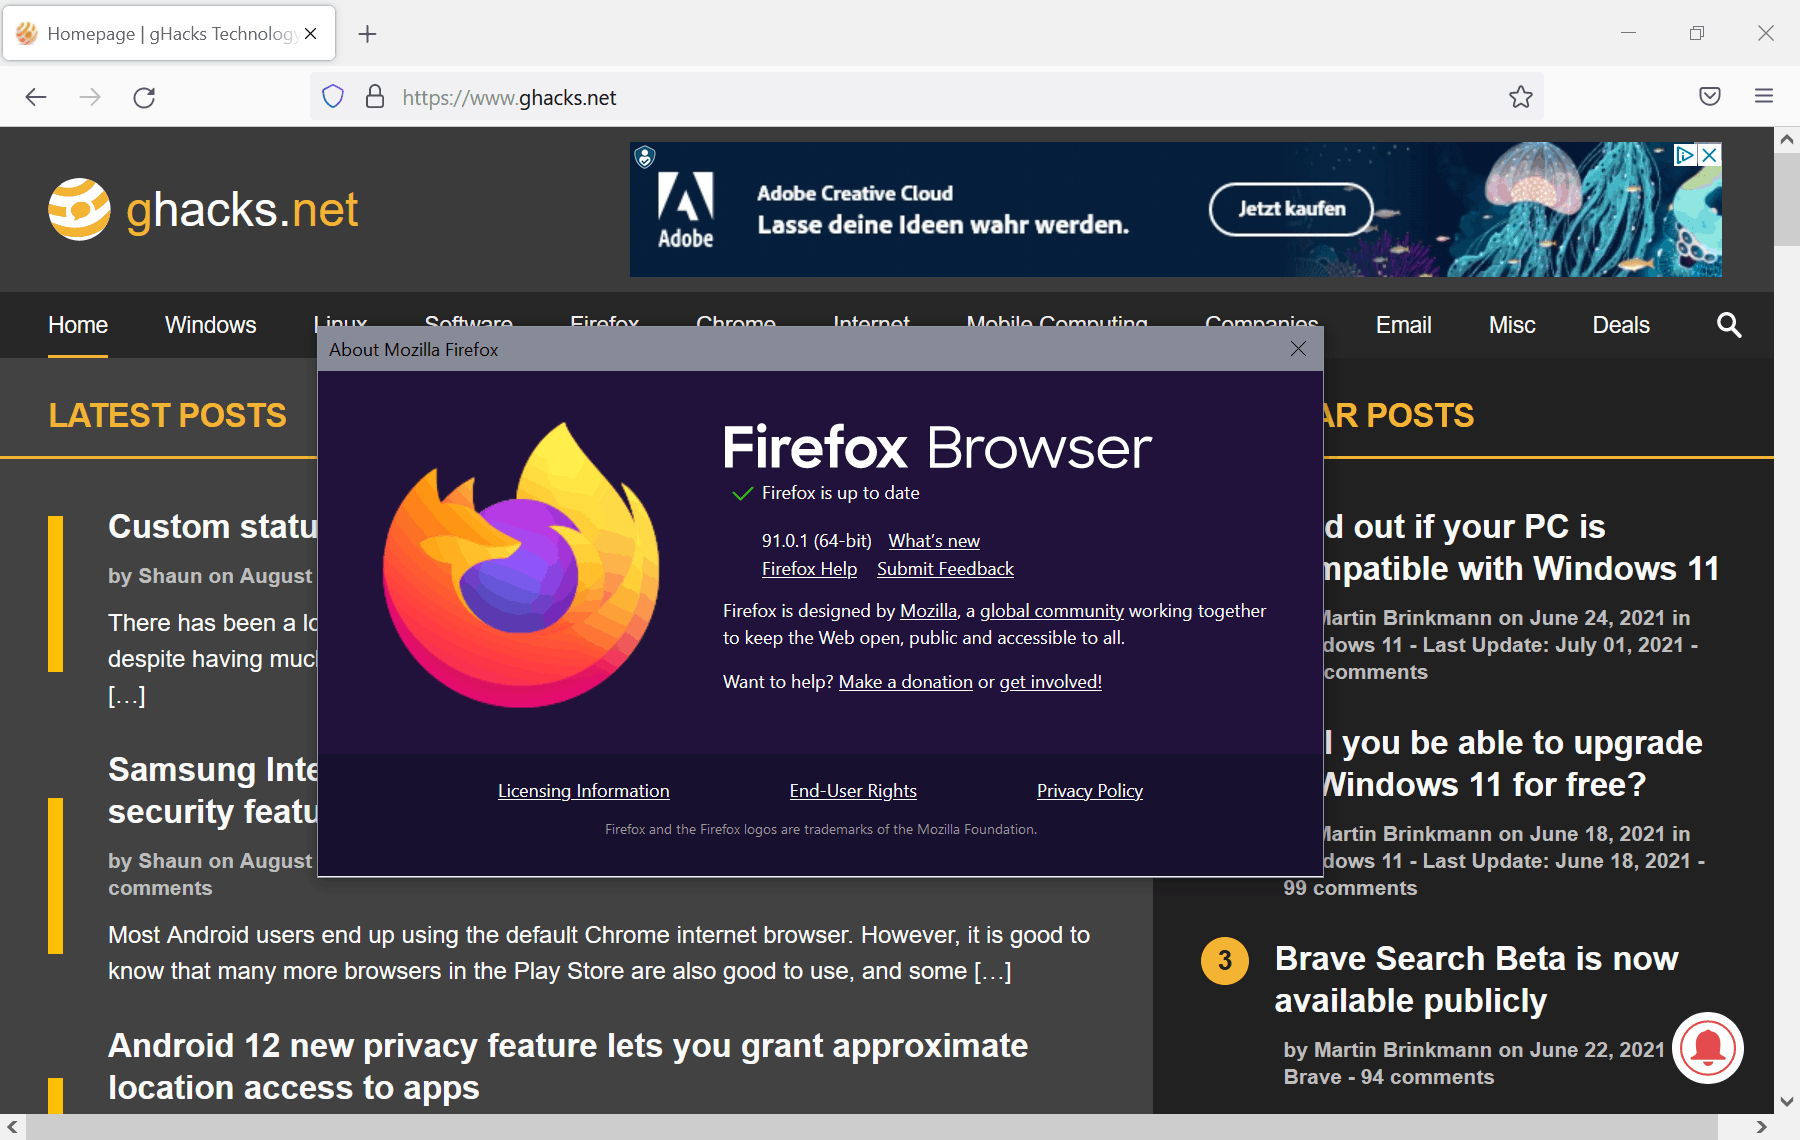 Firefox 91.0.1 fixes stability and security issues